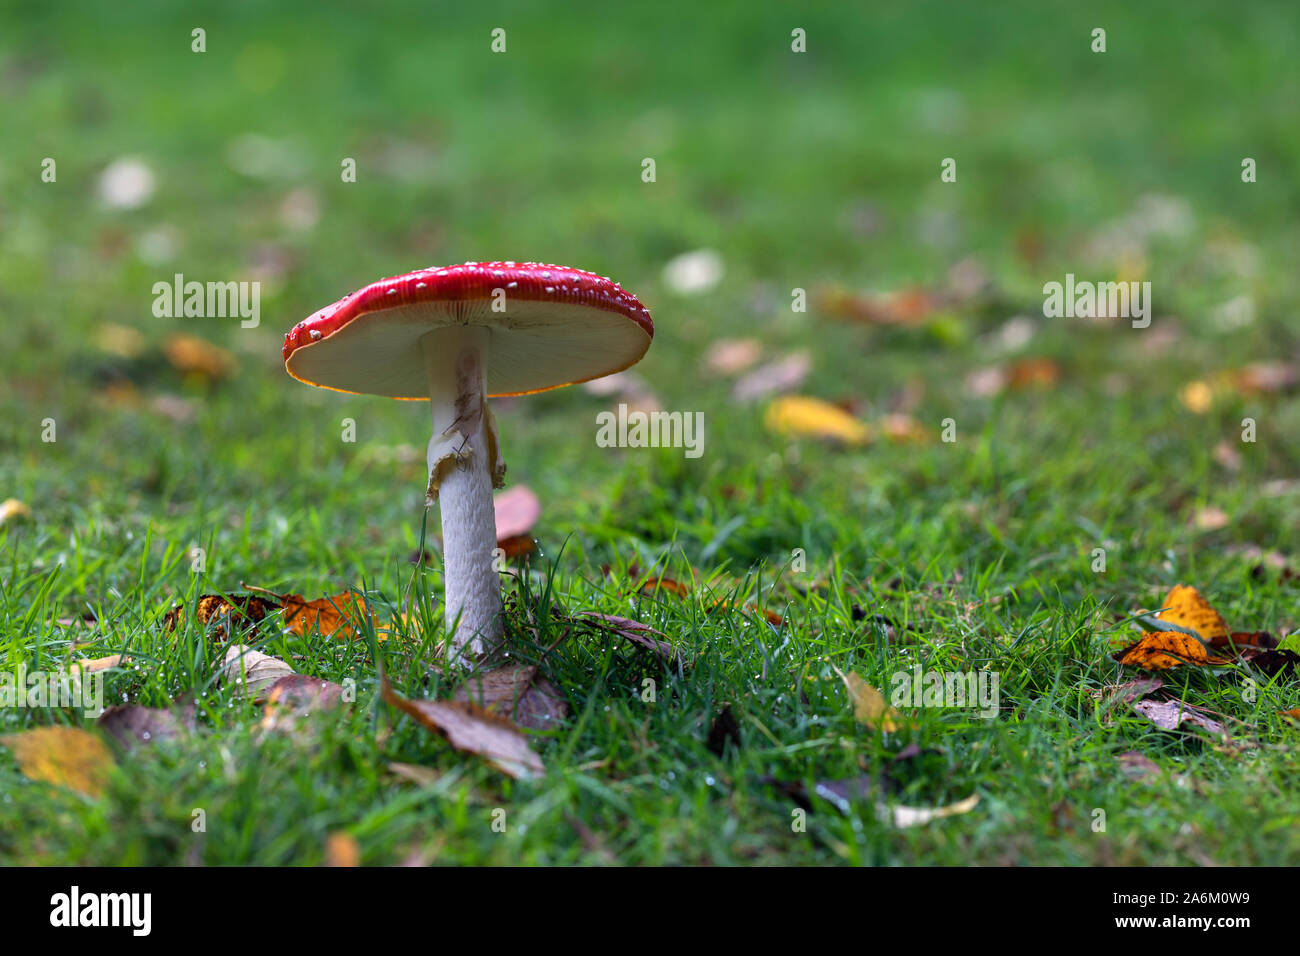 Close up of a single red Fly agaric mushroom - Amanita muscaria. A toxic toadstool growing in the grass at Westonbirt, England, UK Stock Photo